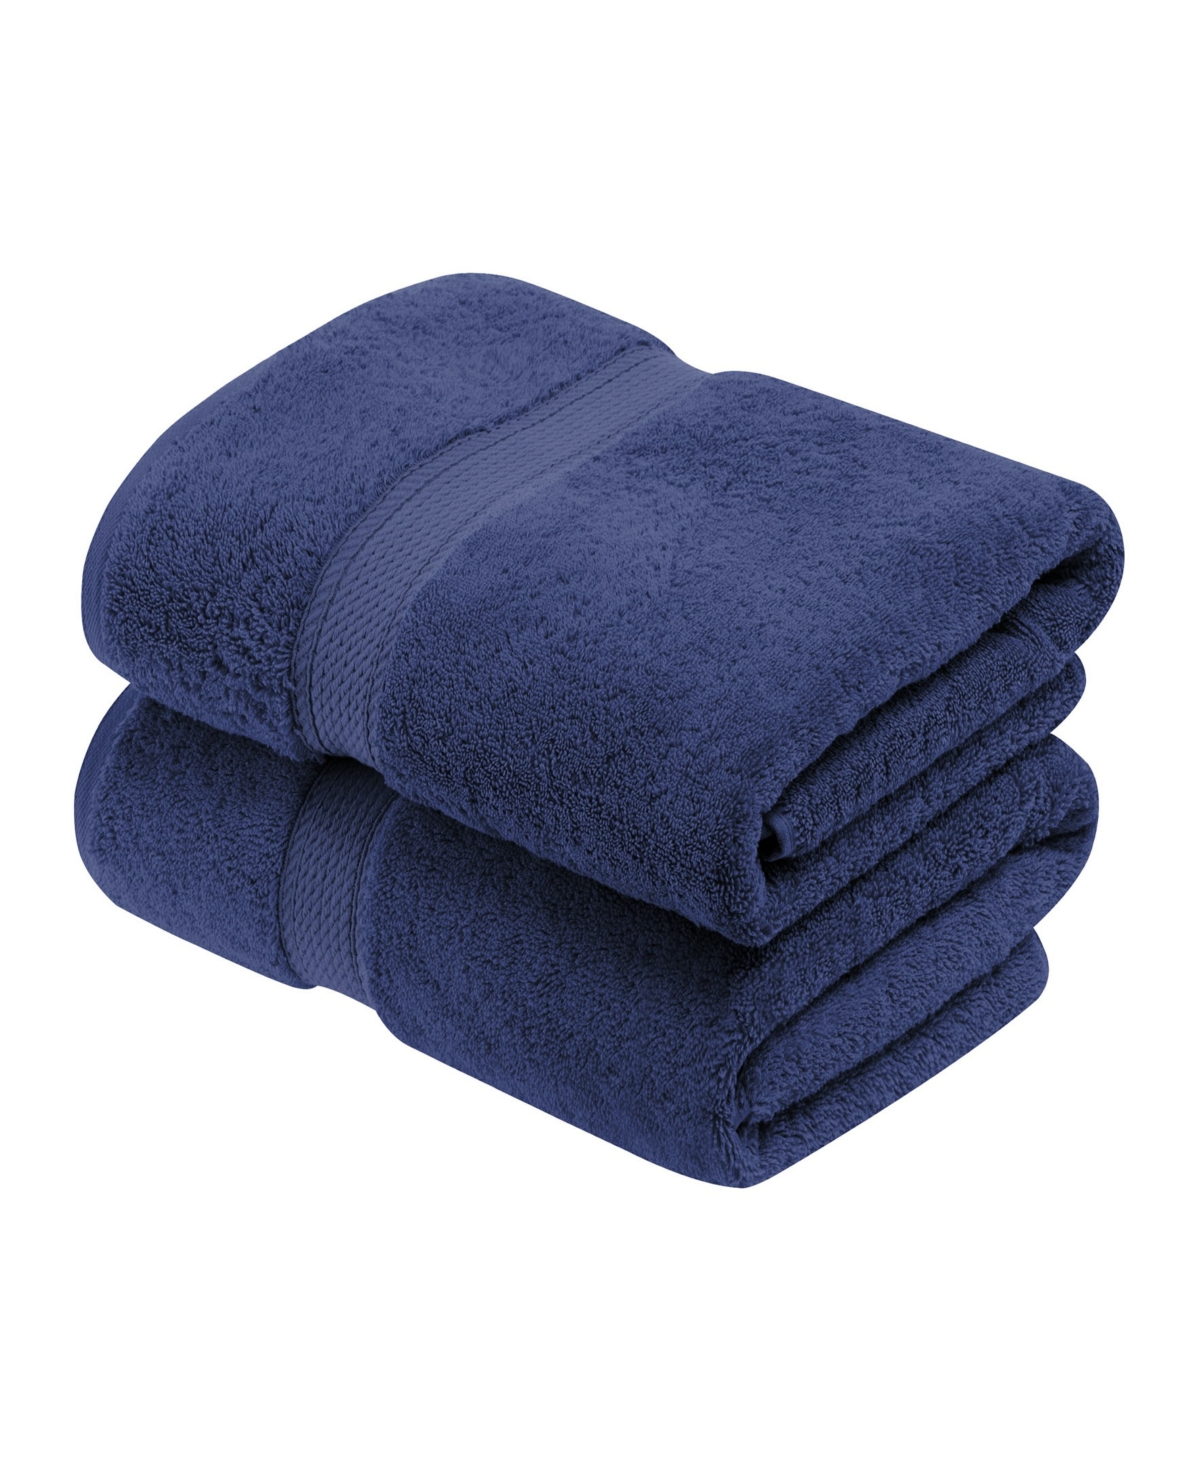 Superior Highly Absorbent Egyptian Cotton 2-piece Ultra Plush Solid Bath Towel Set Bedding In Navy Blue